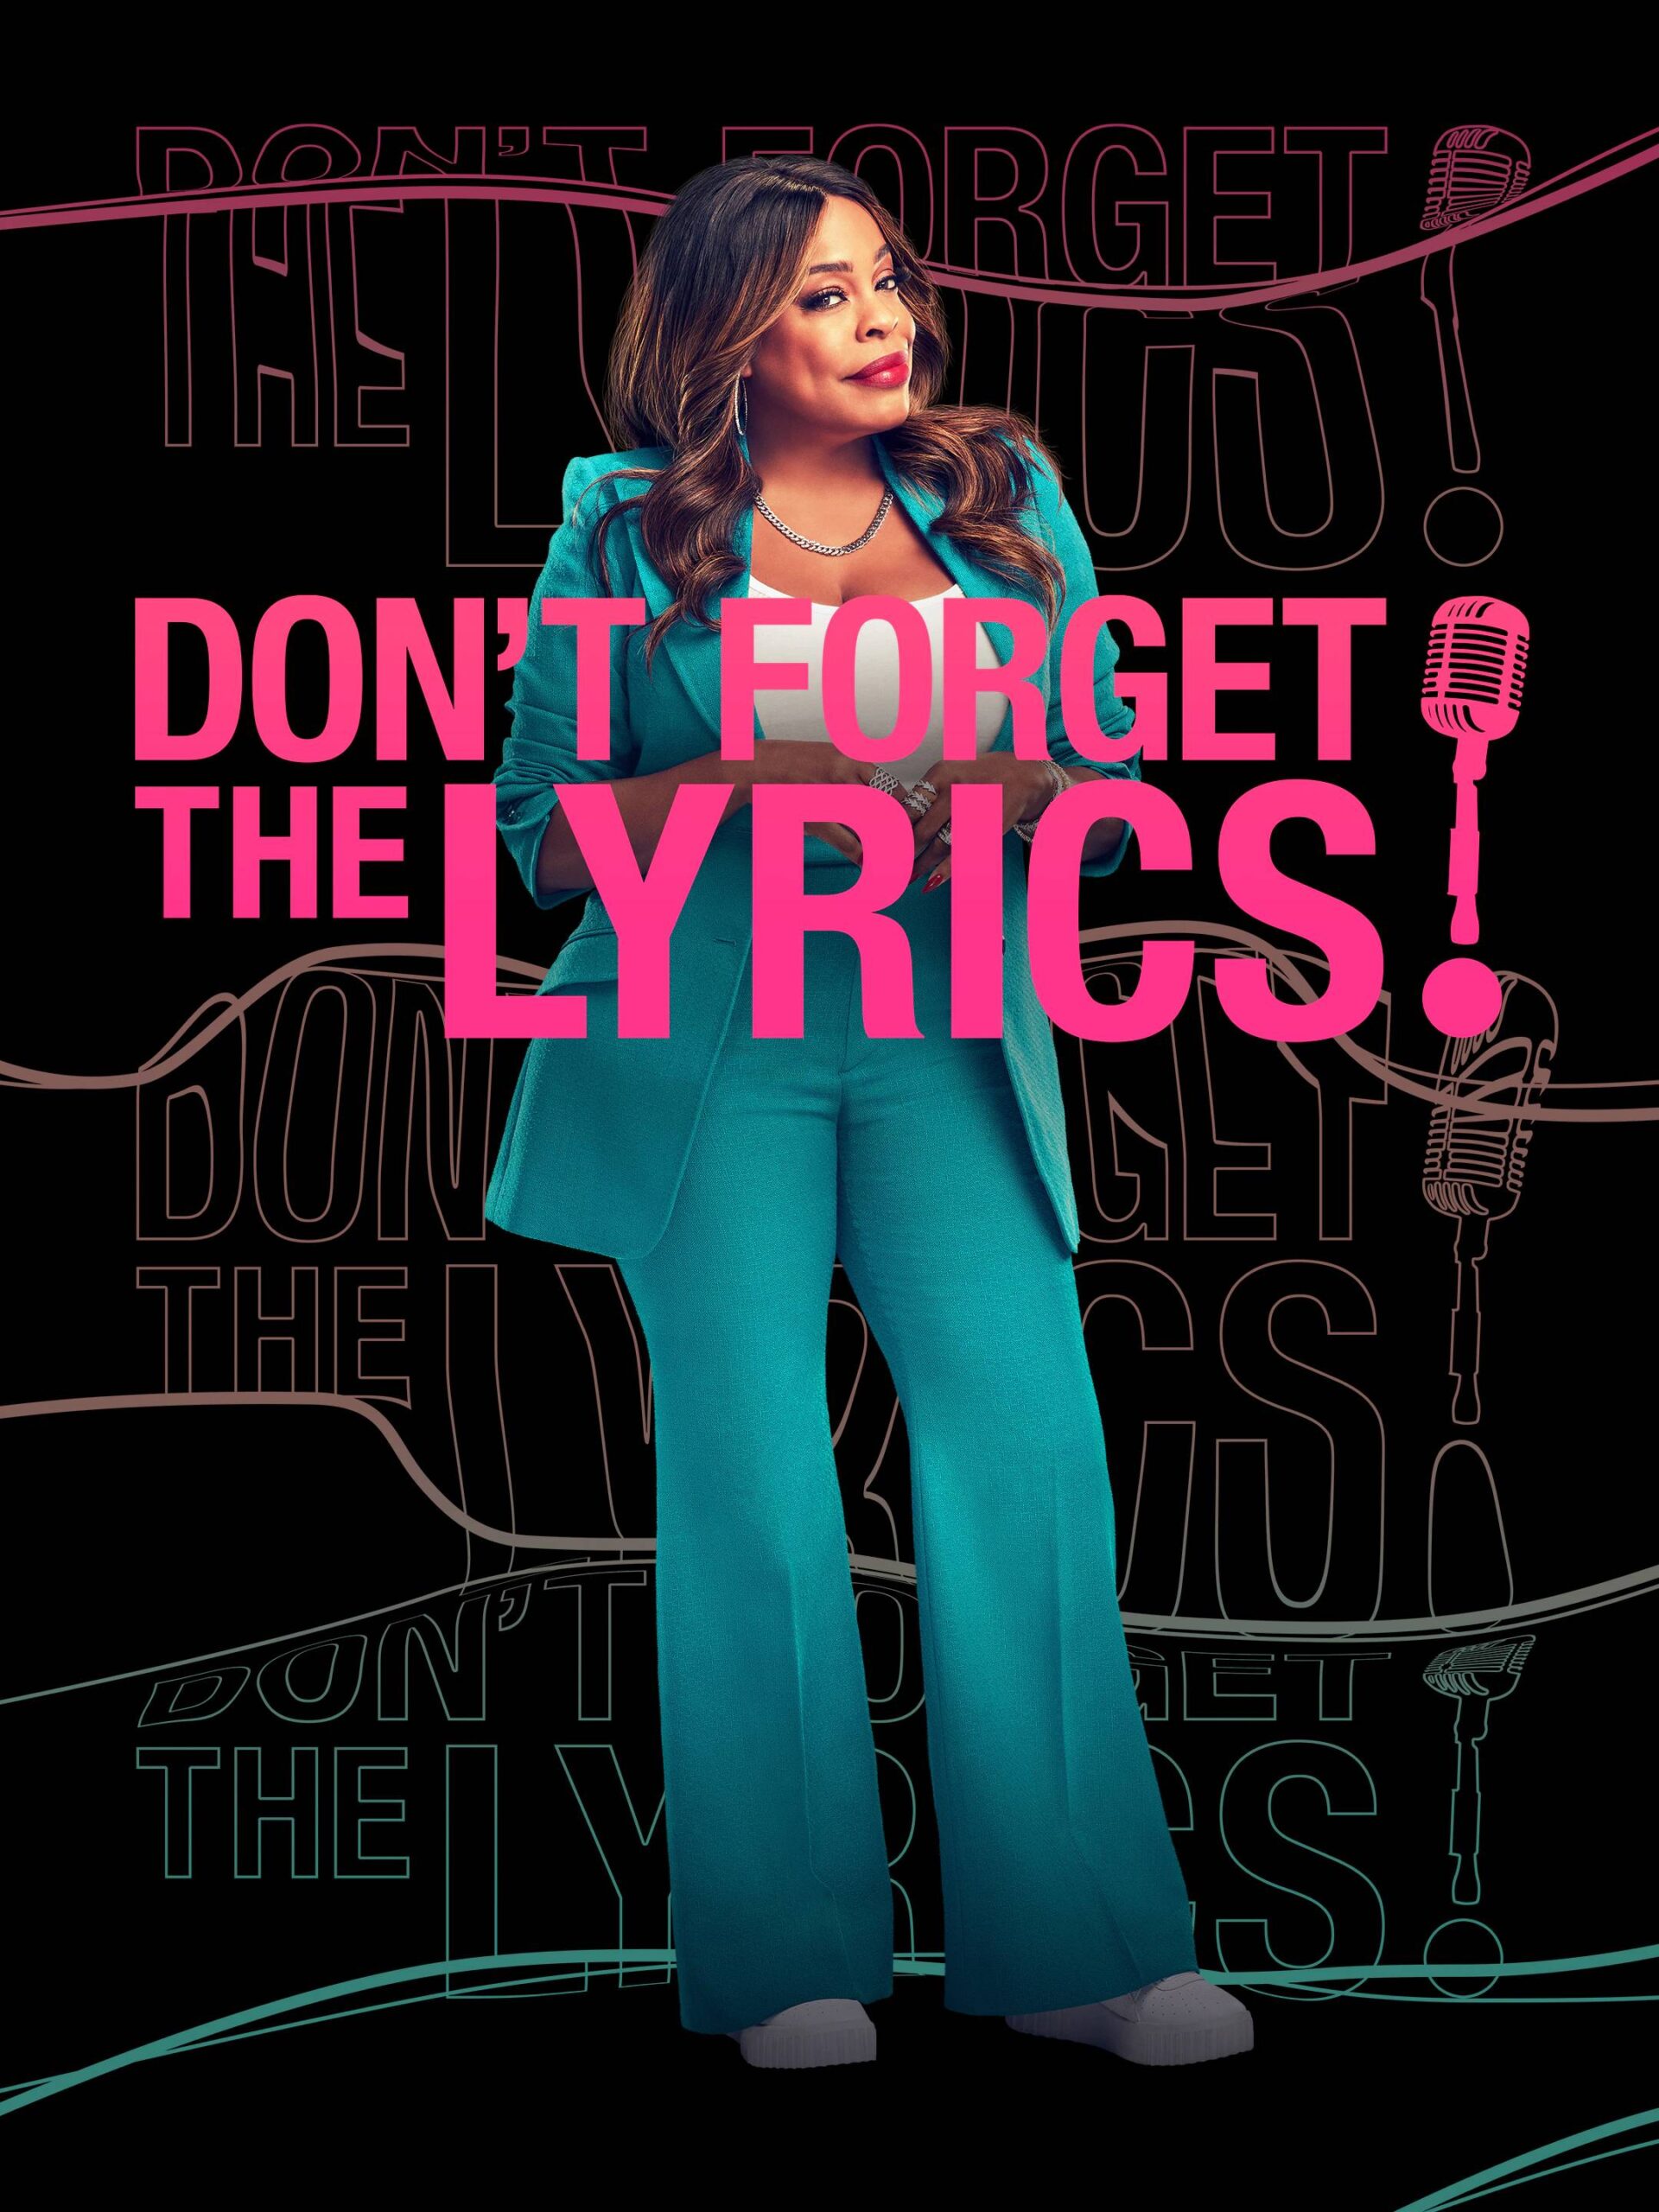 Season Three of Musical Game Show "Don't Forget the Lyrics" Hosted by Niecy Nash Premieres May 23